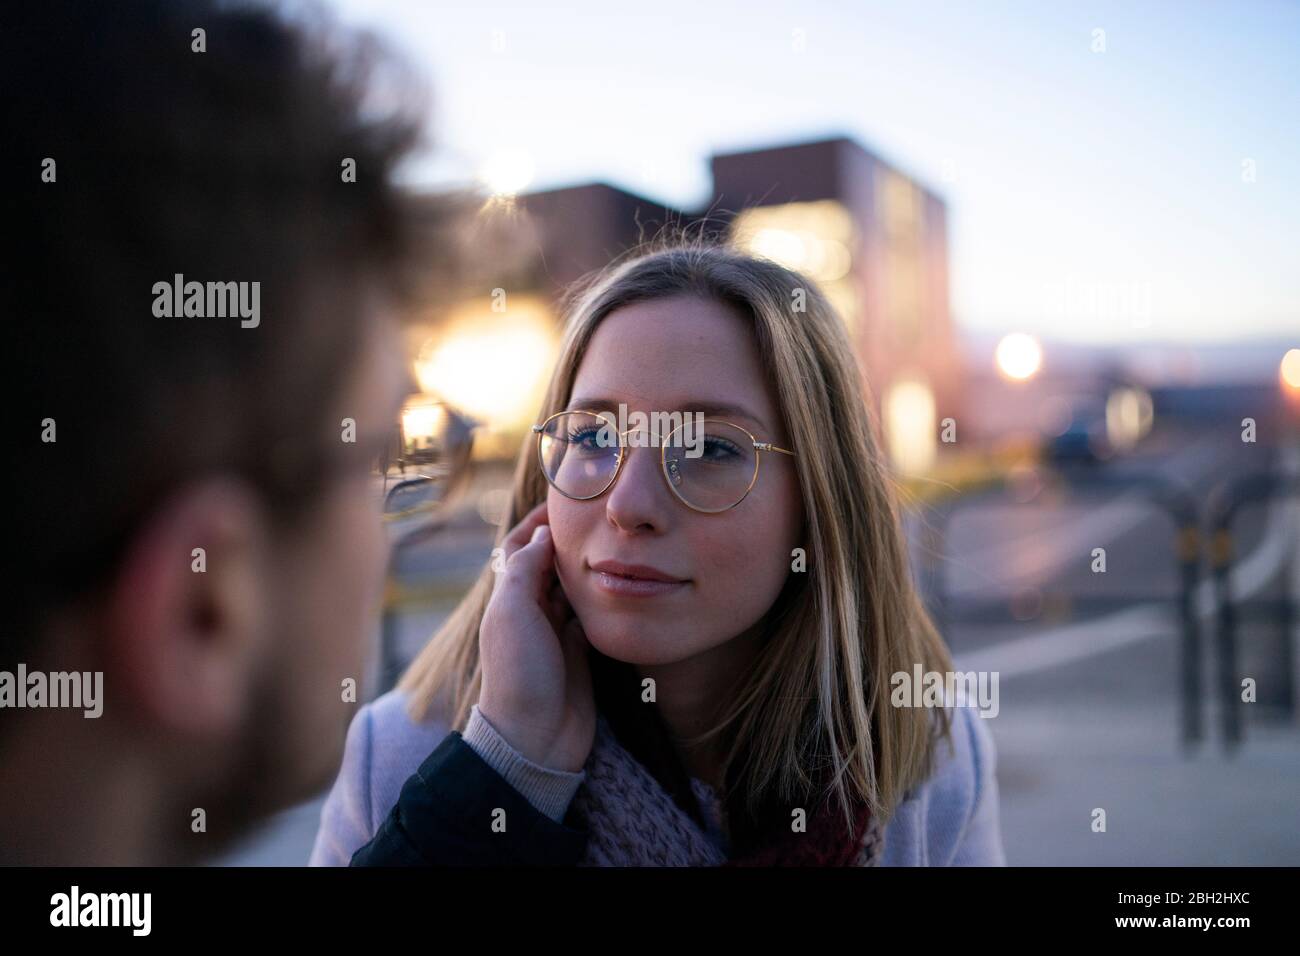 Portrait of blond young woman face to face with her boyfriend at evening twilight Stock Photo